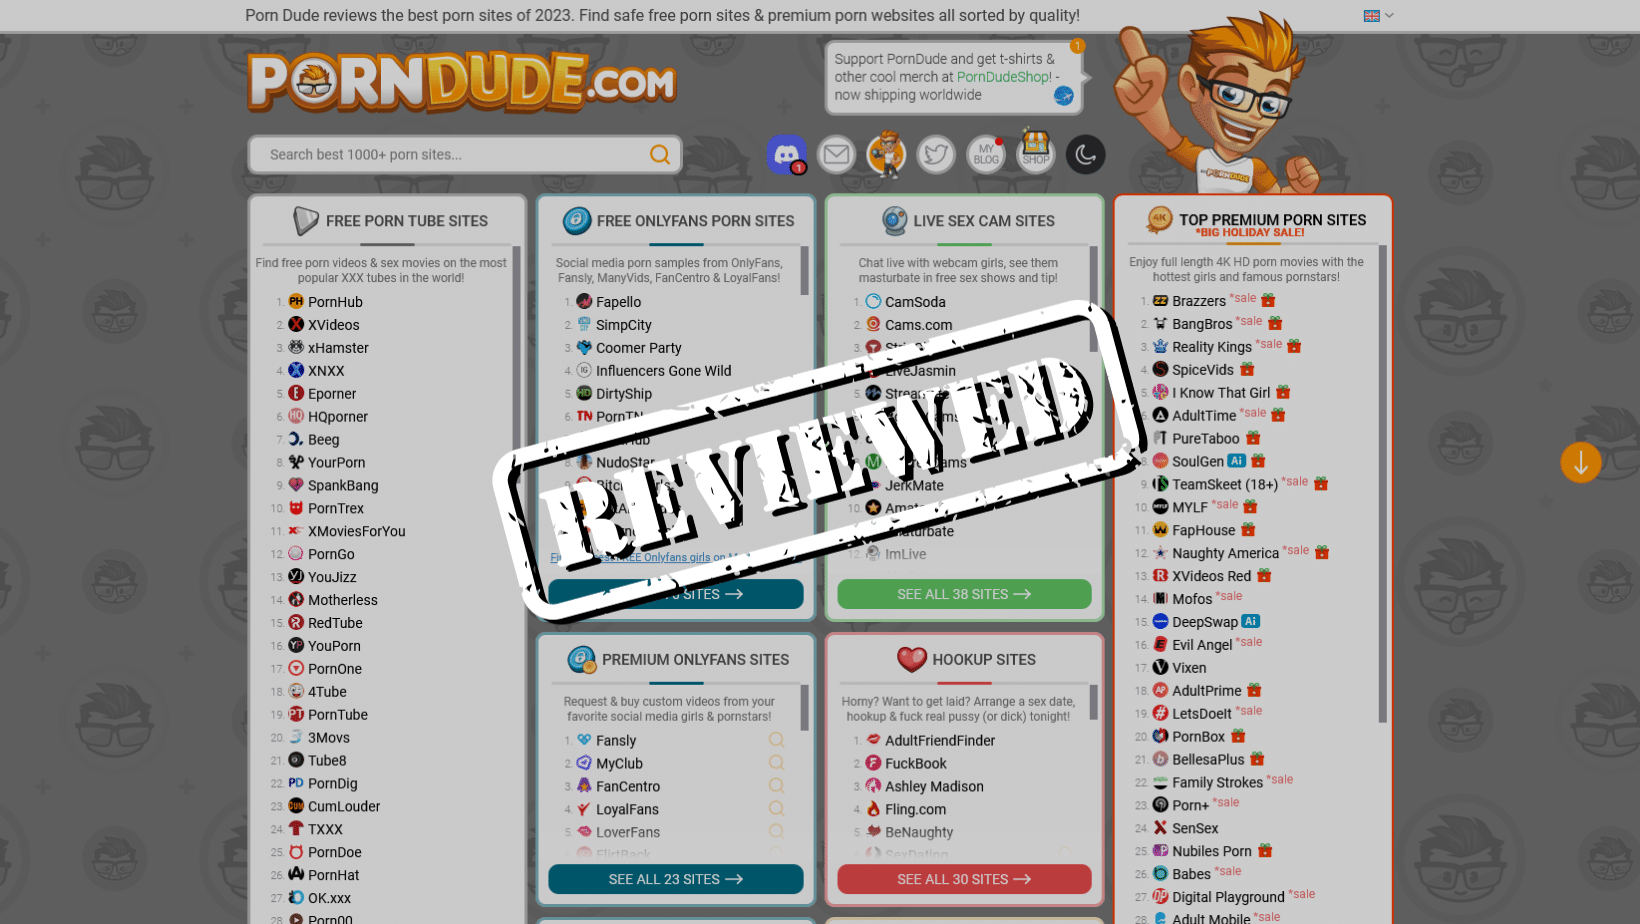 ThePornDude Review - Find the Best Porn Sites in the World! | Bedbible.com